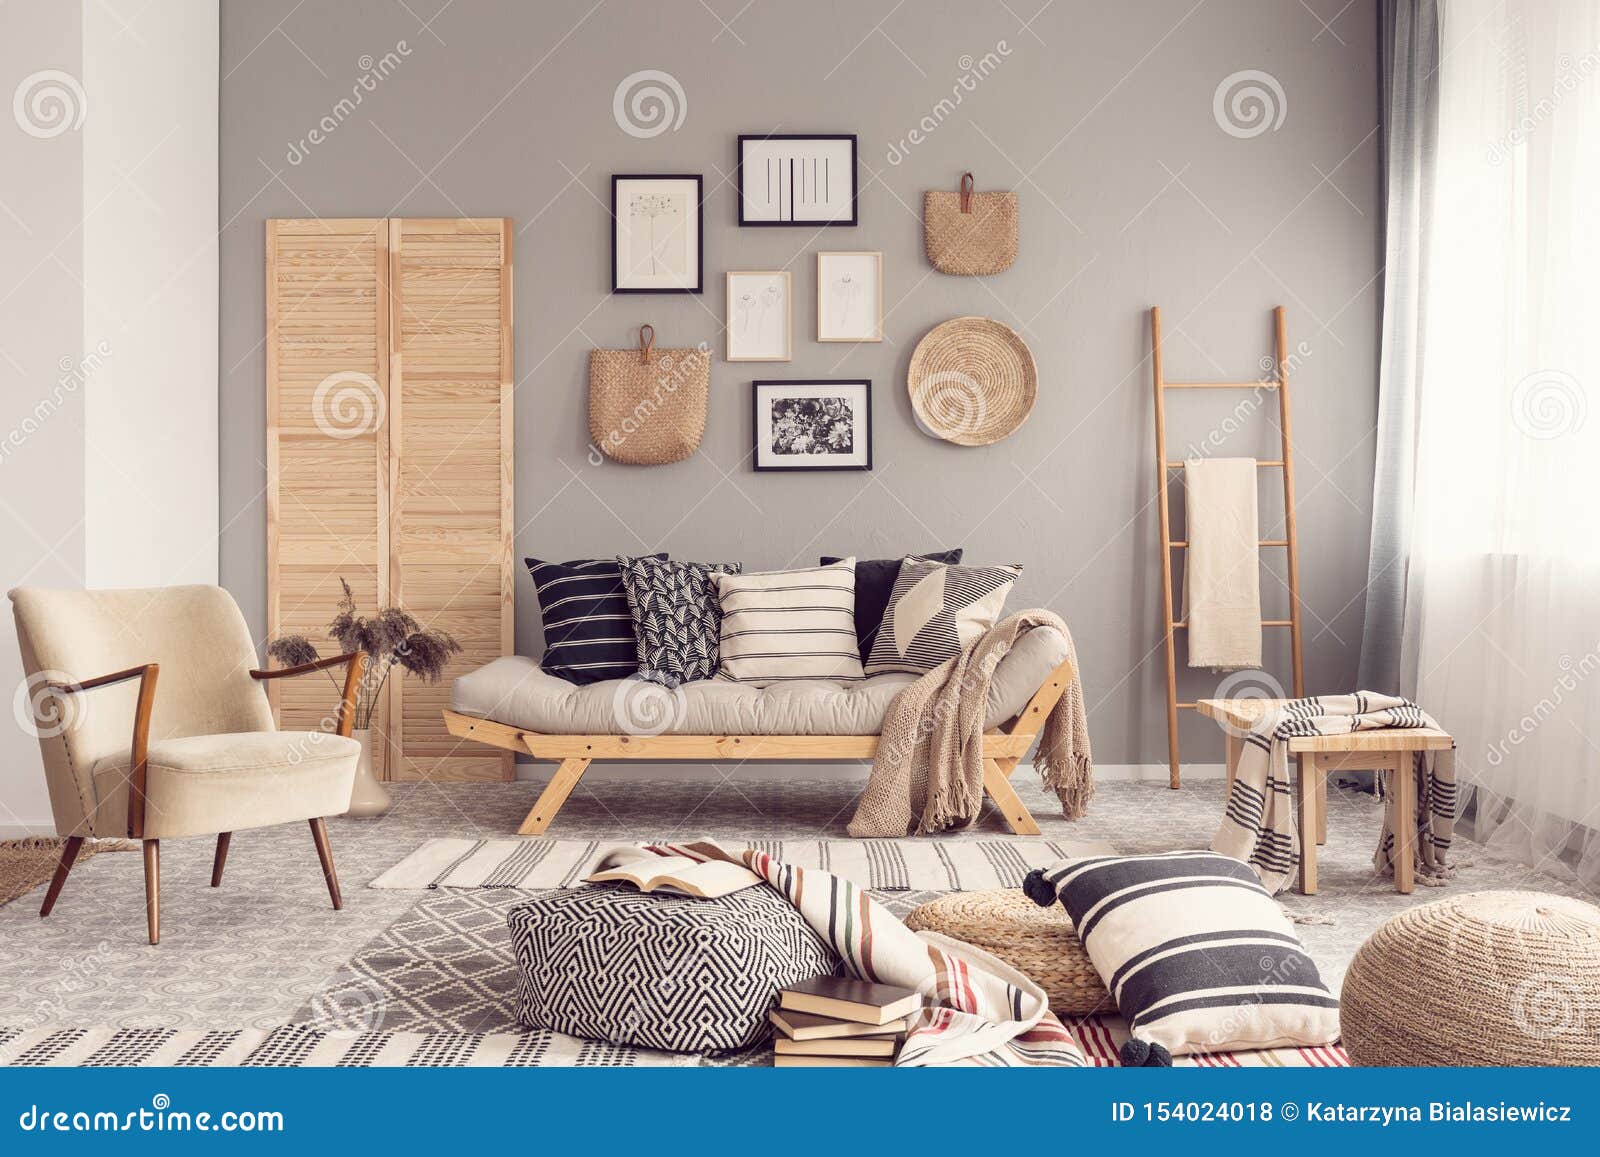 stylish living room interior  with scandinavian settee, grey wall and natural accents